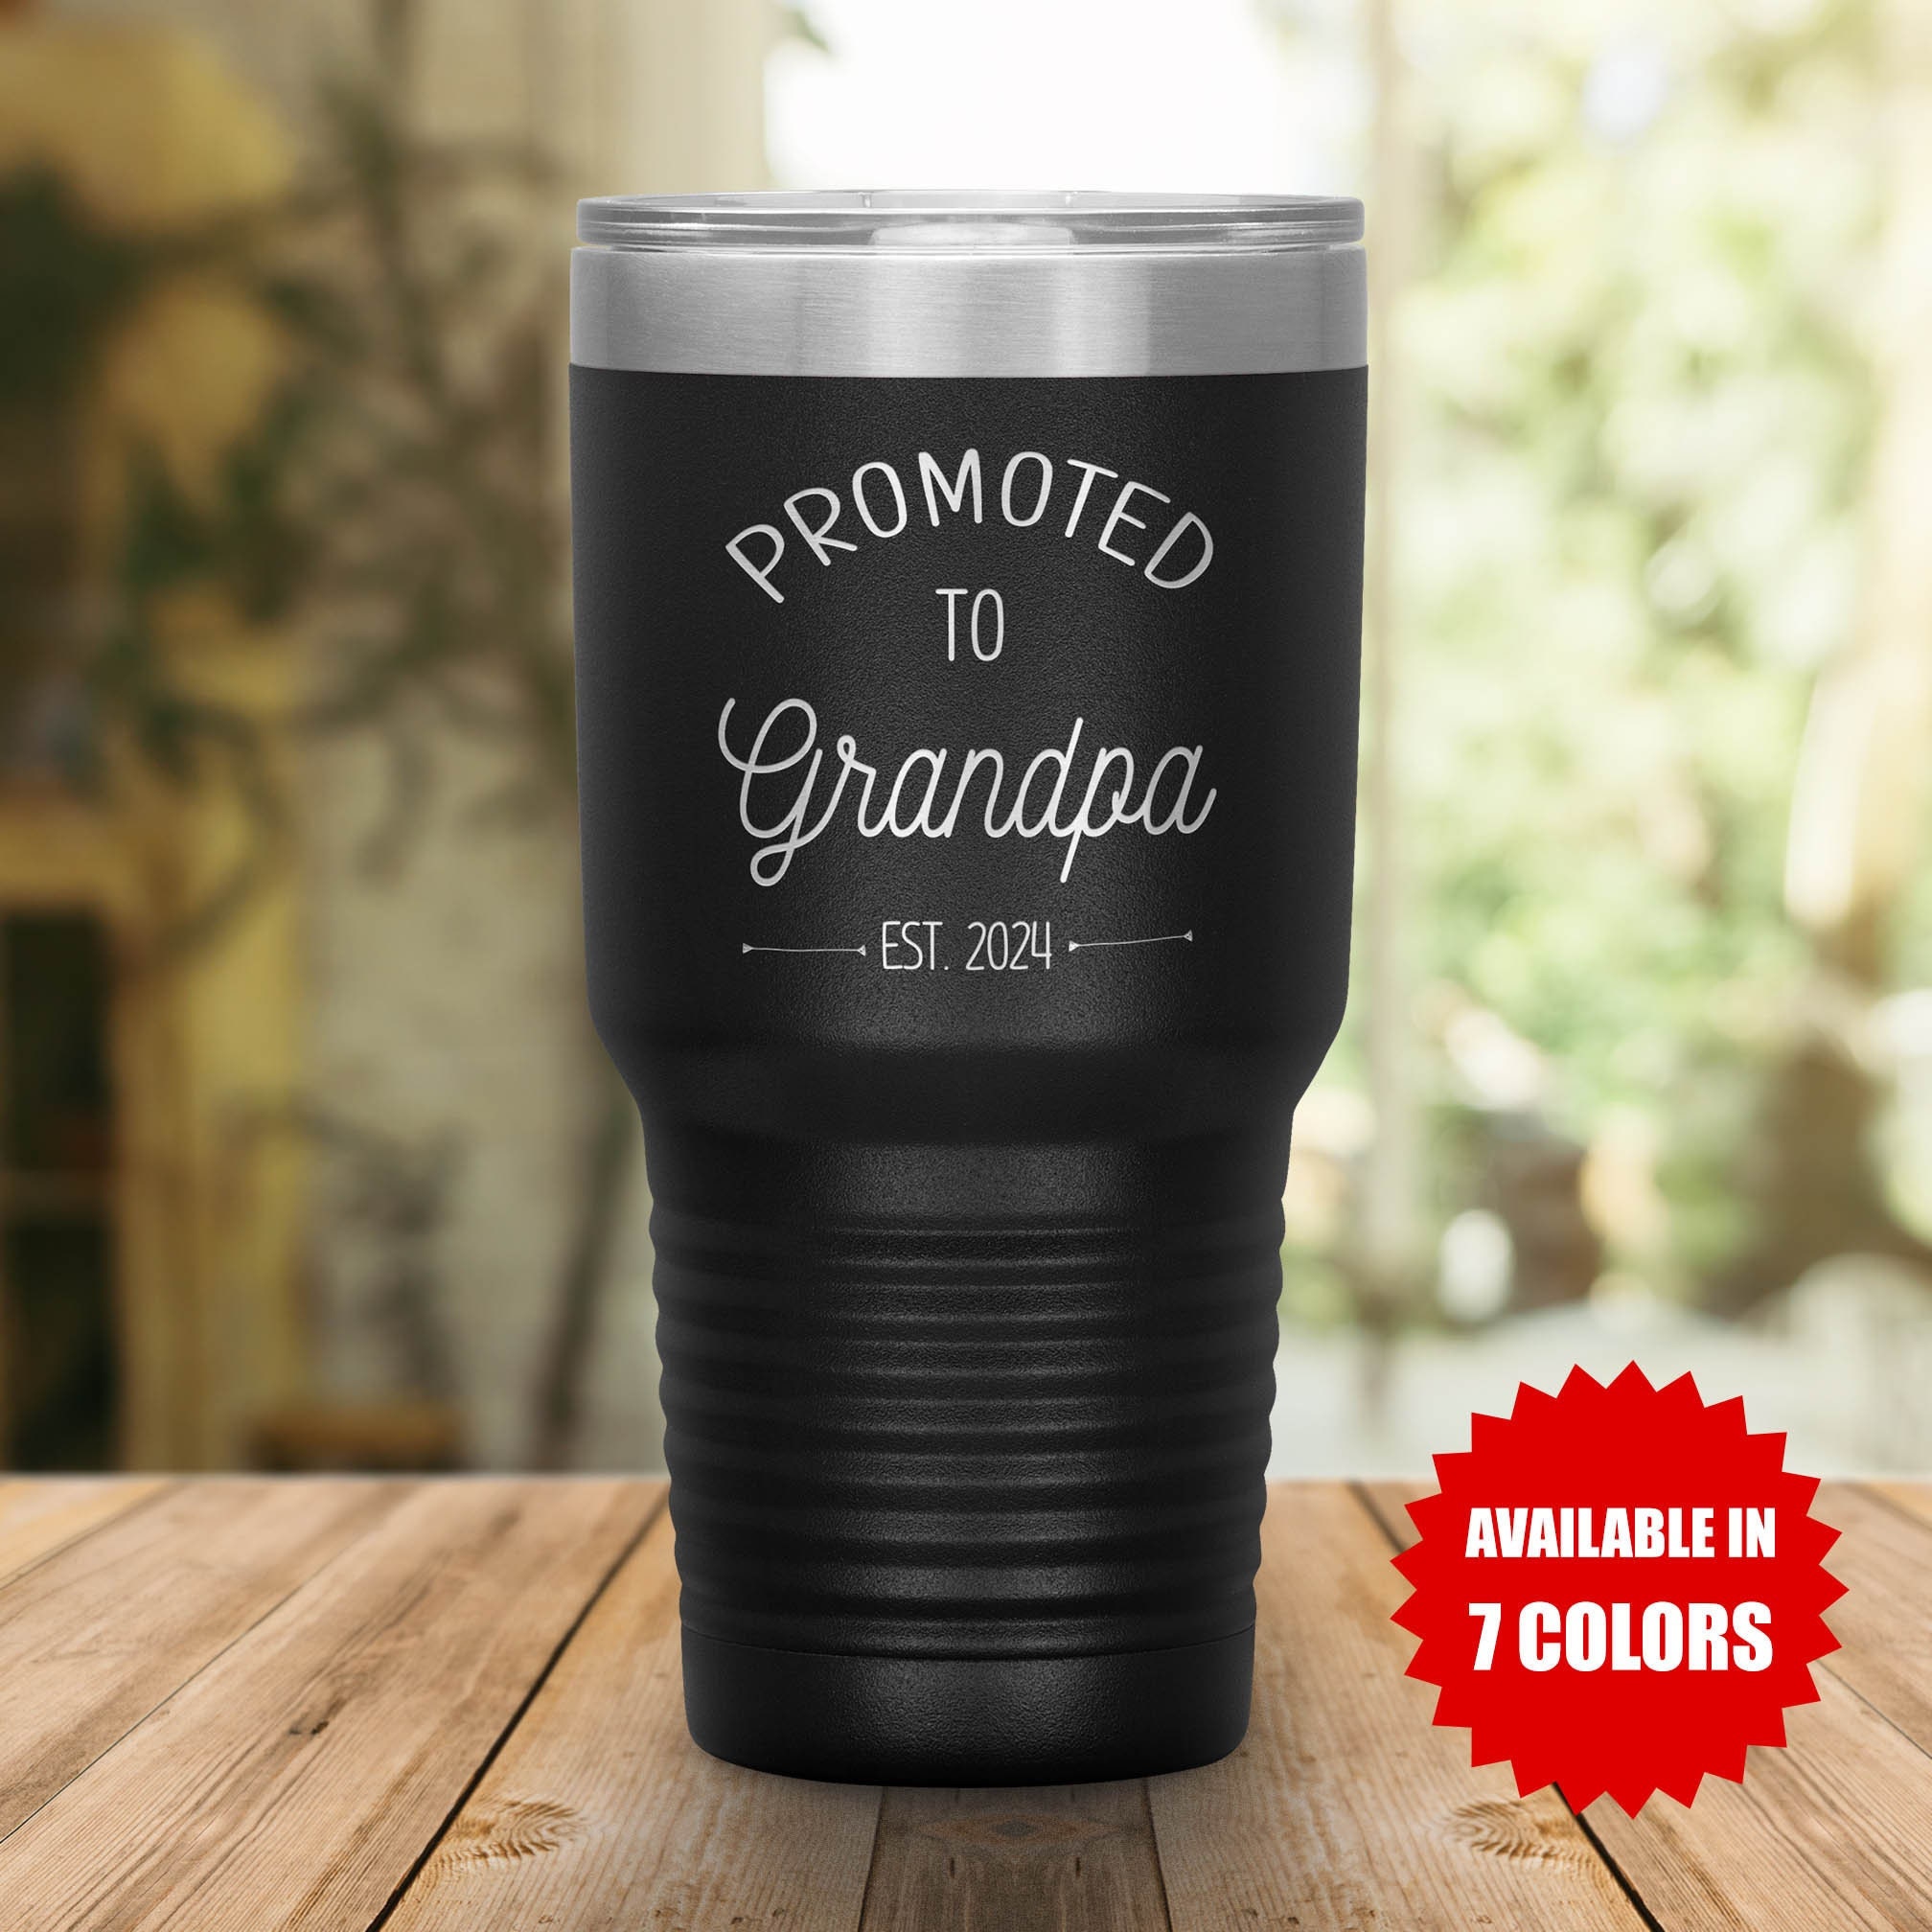 Father's Day gift】Extra large tea compartment thermos cup with